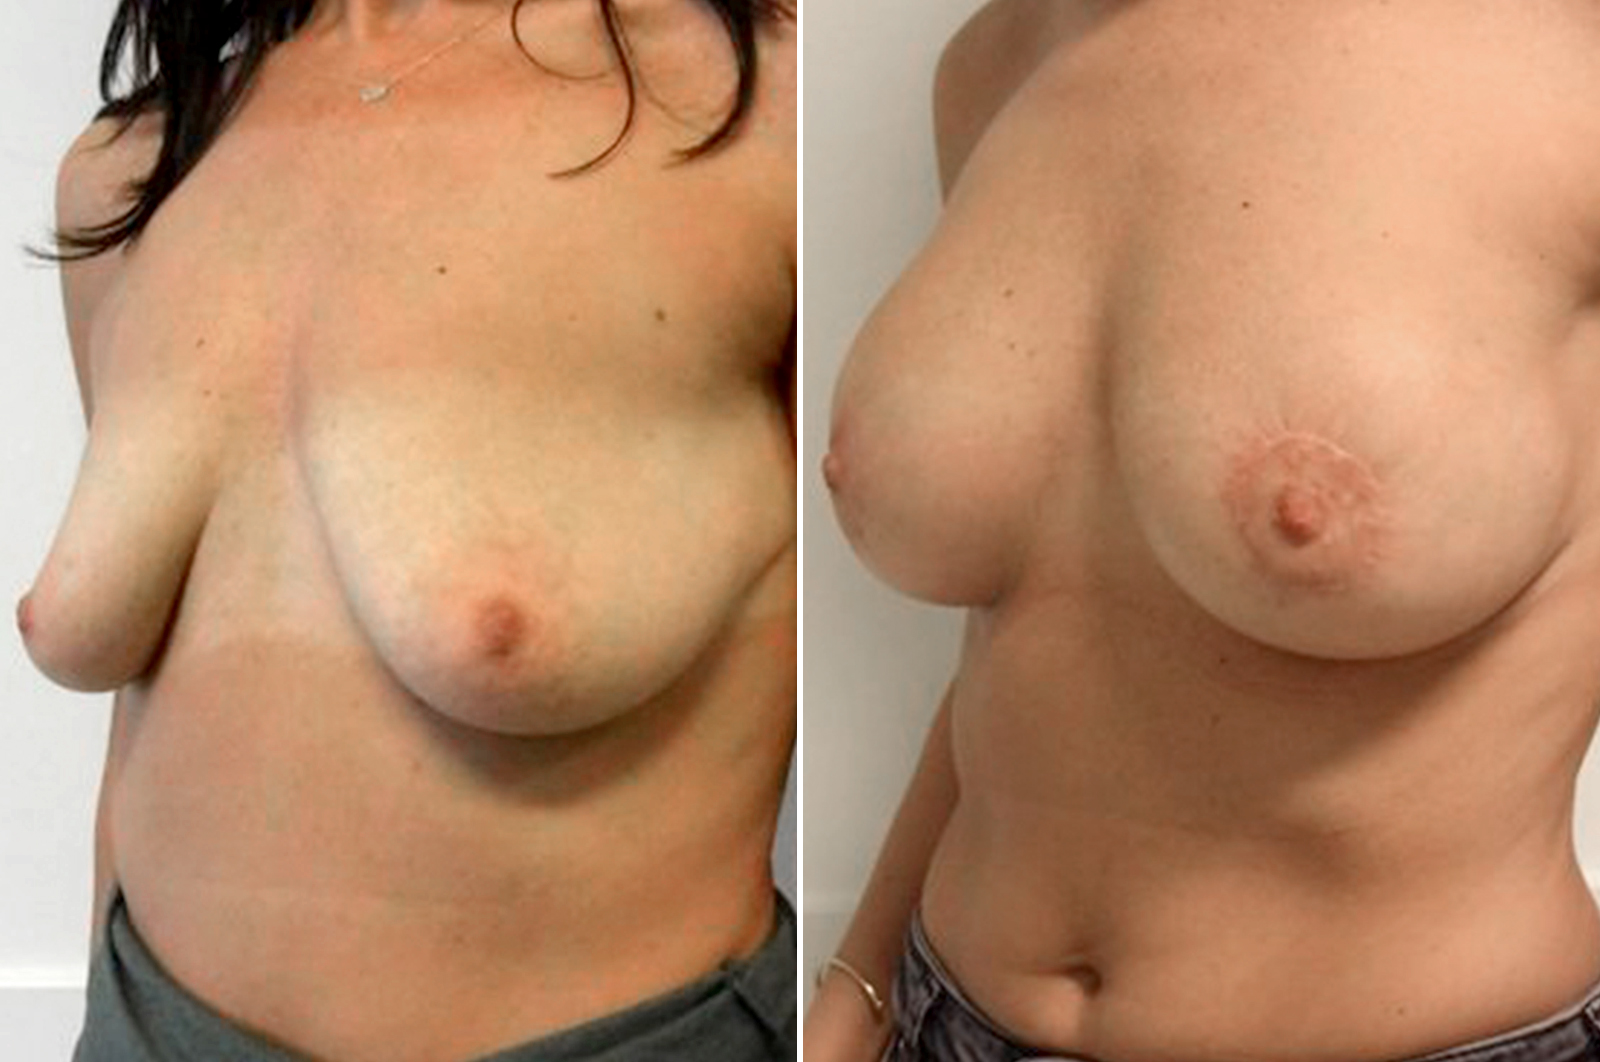 Body surgery breast lift before and after surgery in antwerp